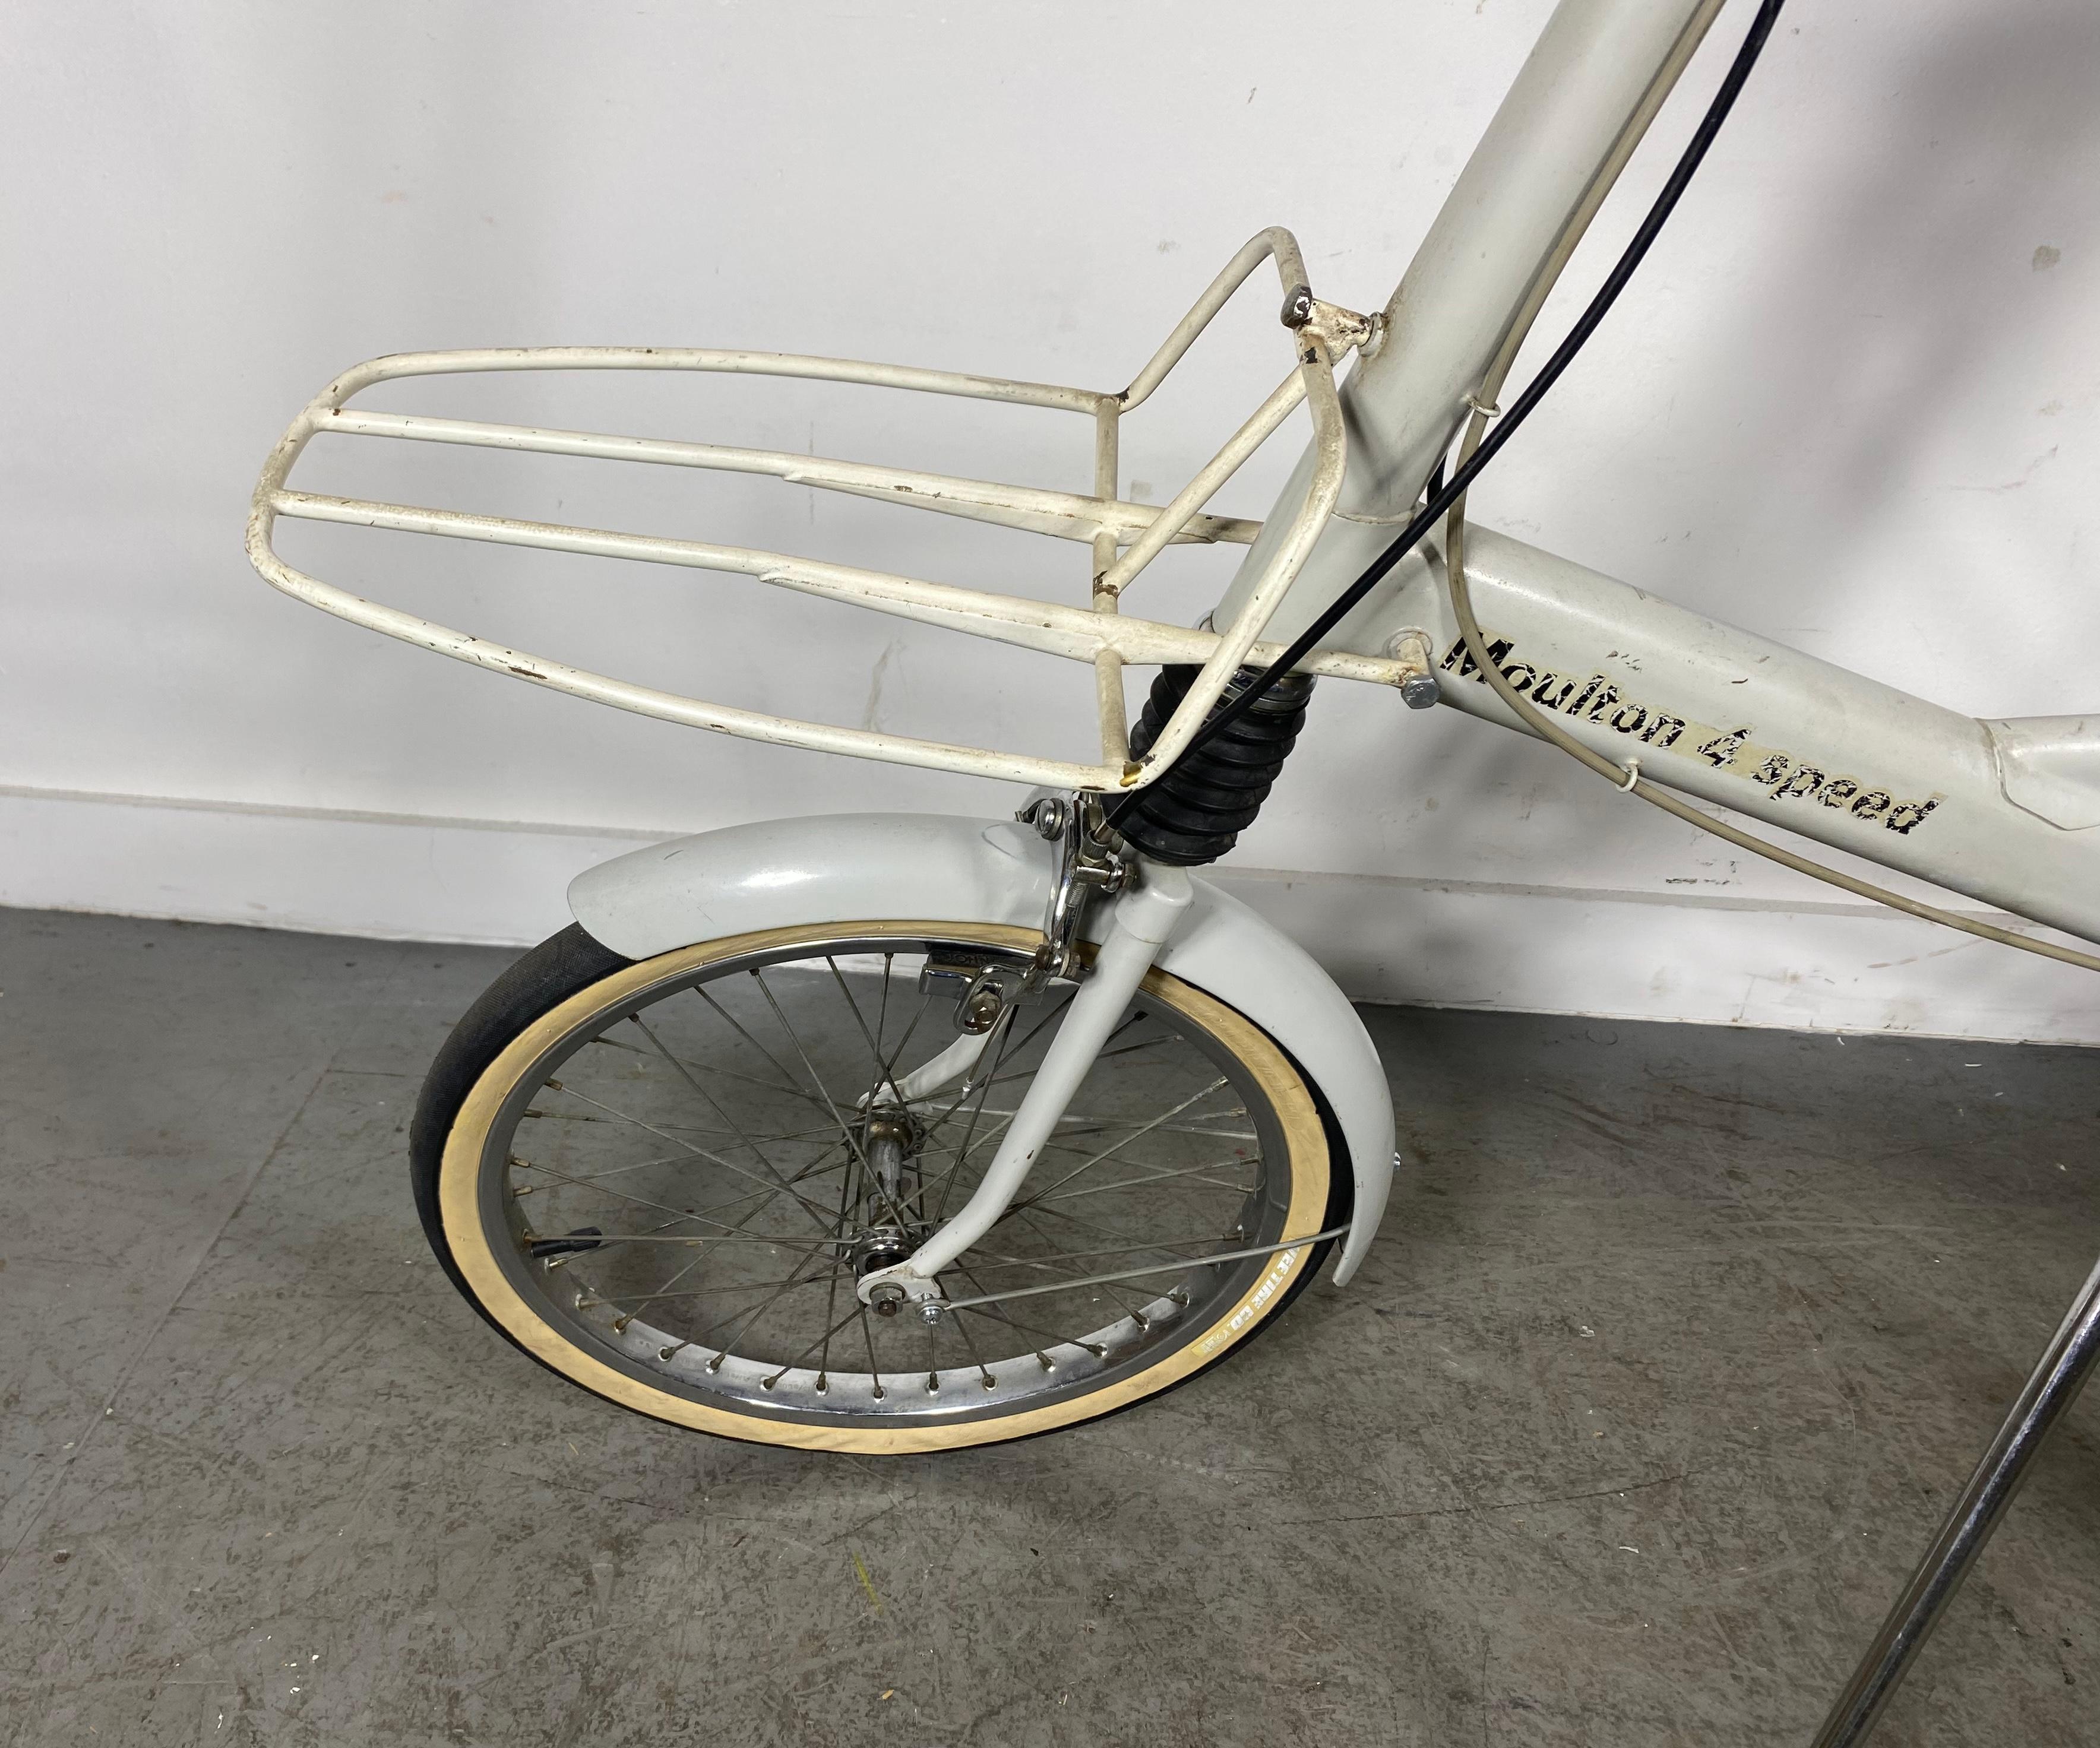 Classic Alex Moulton 4-speed Bicycle, modernist design.. Amazing design,, All original,, Nice condition,,great riding bike,, probably can use a good tune up..